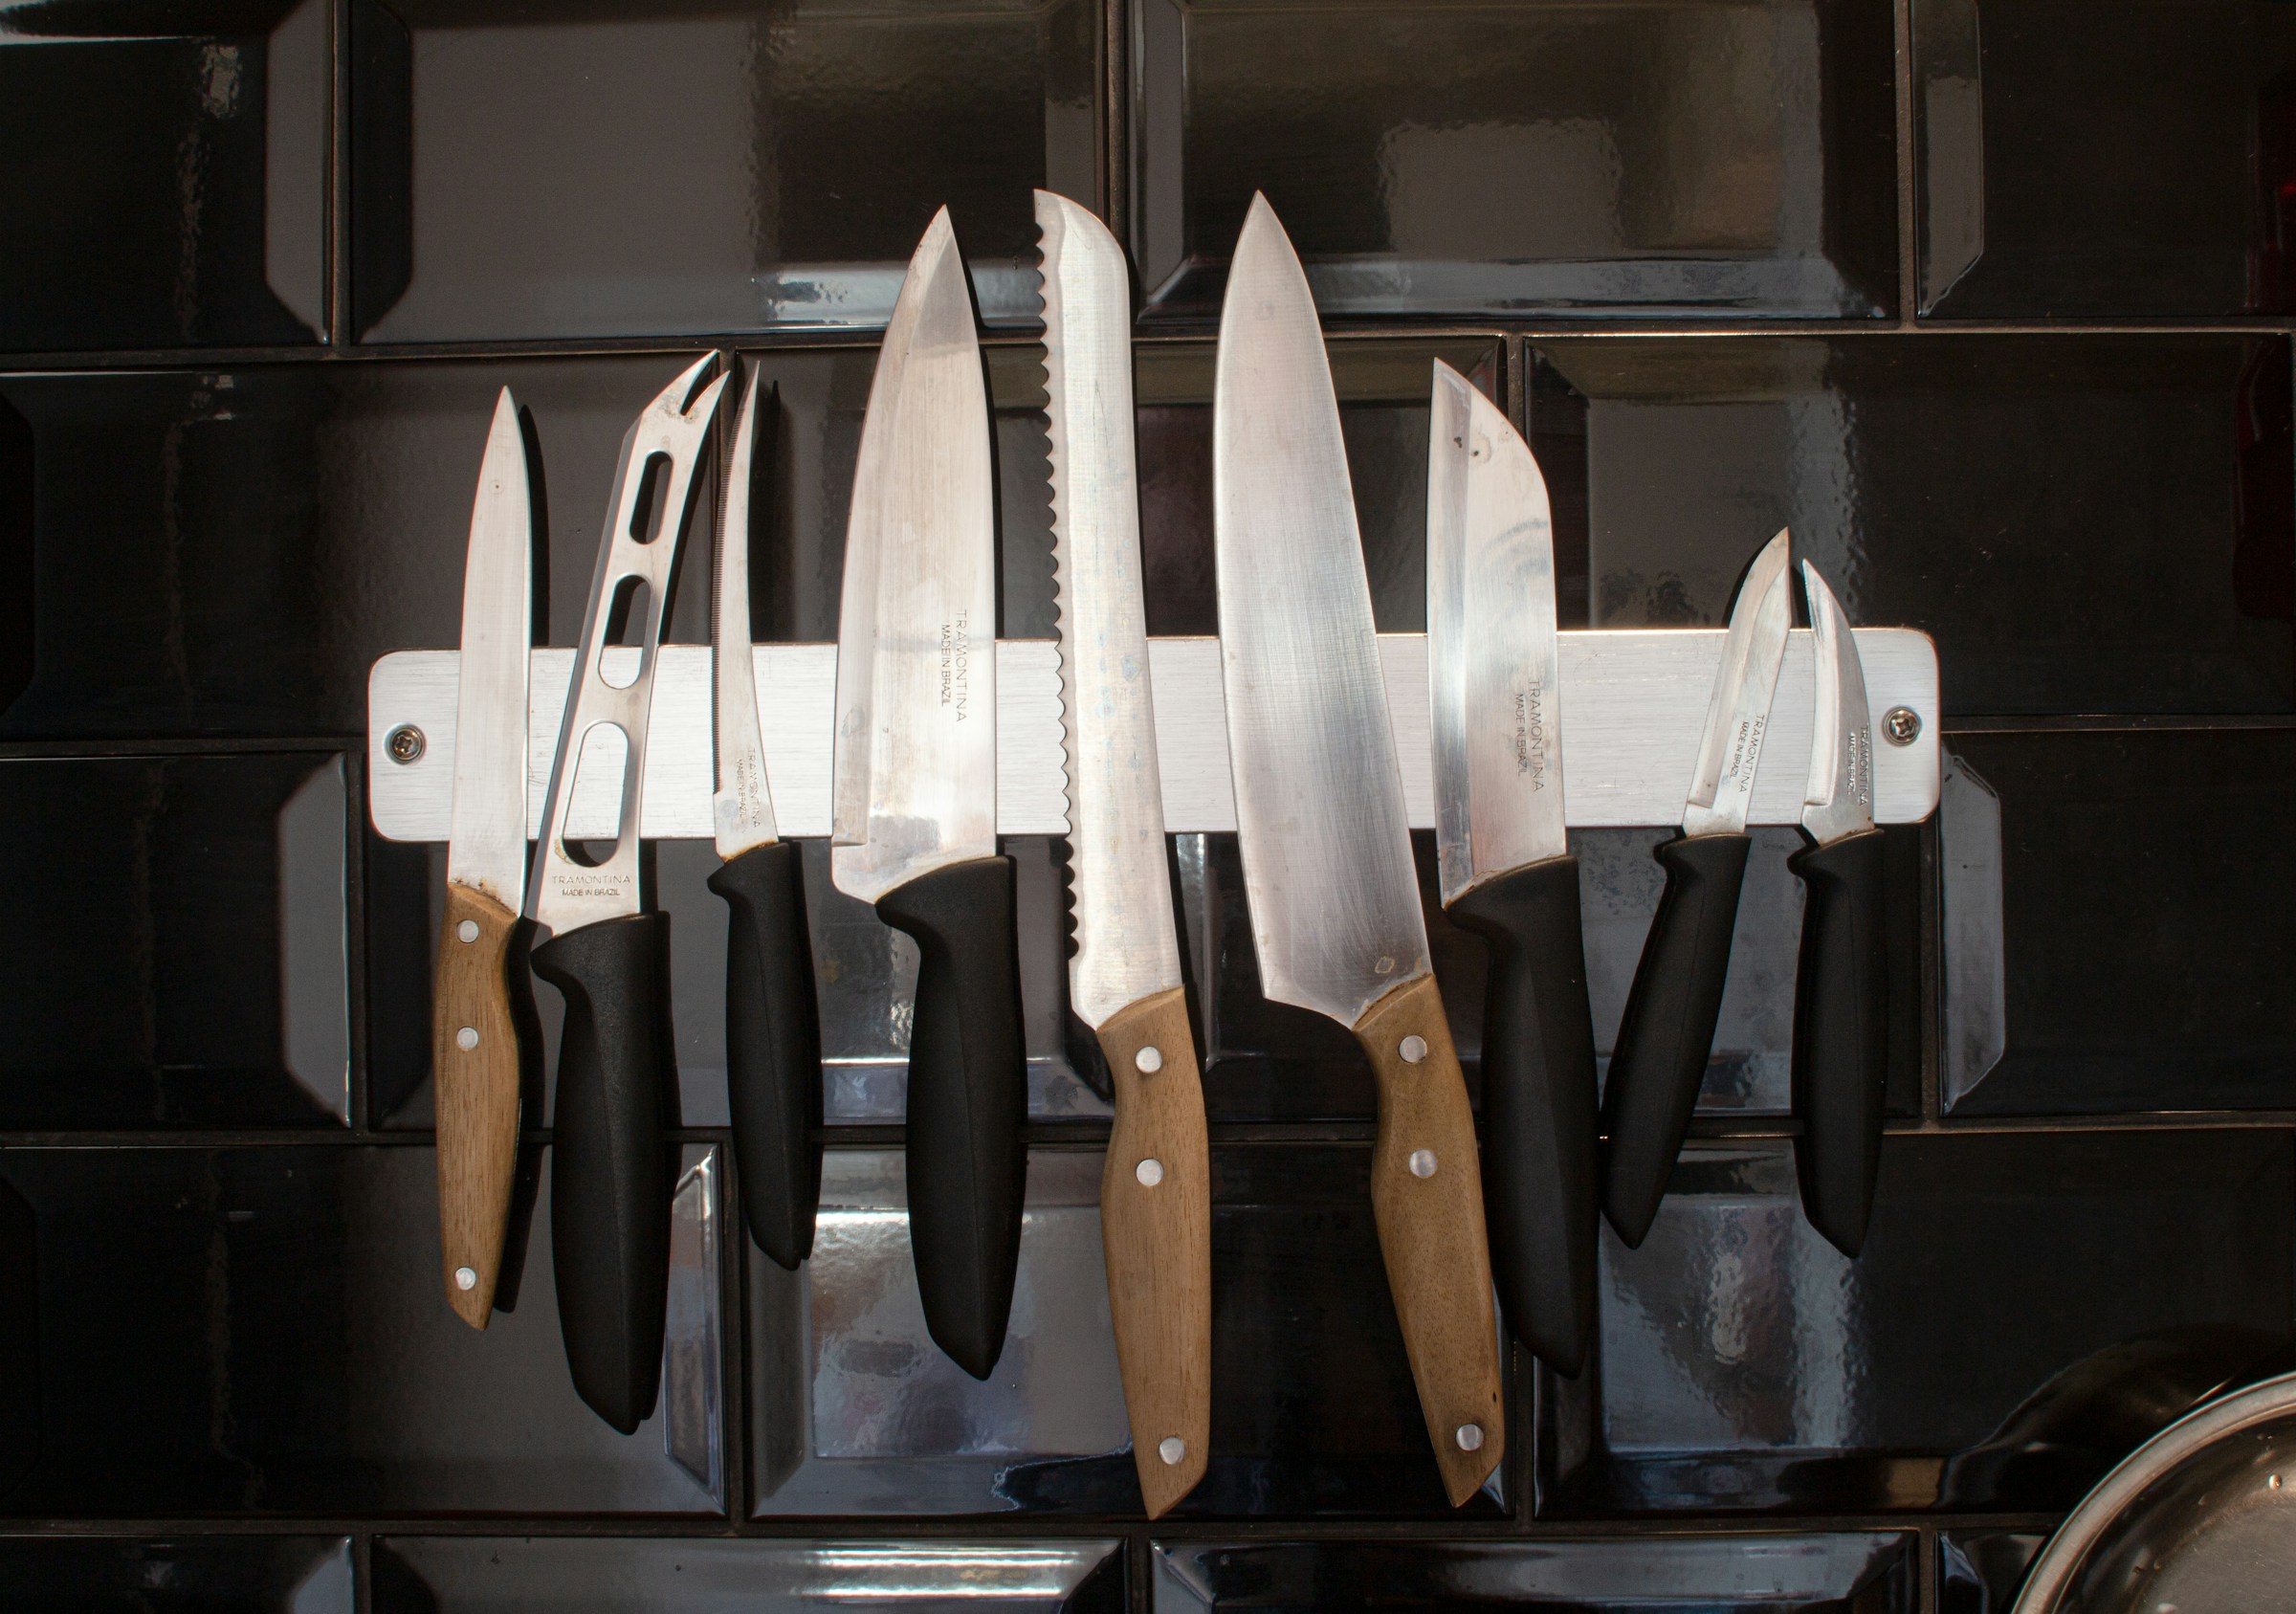 Top 5 Affordable Chef Knives for Everyday Cooking